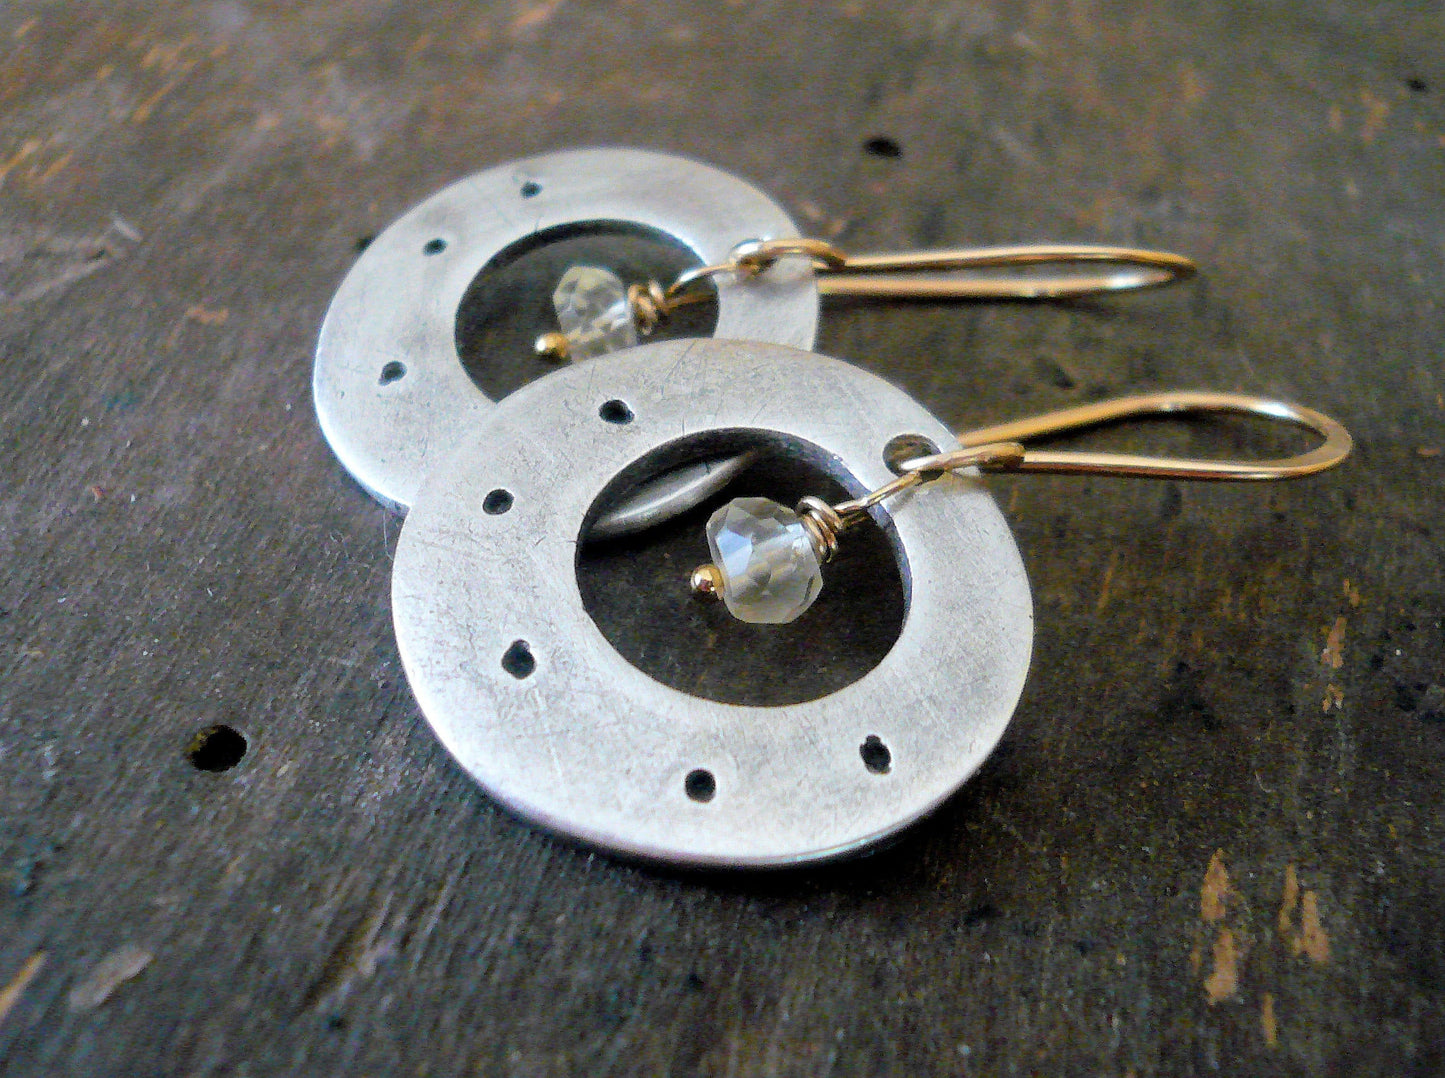 Soleil Collection Orbital Earrings - Oxidized fine silver. 14kt Goldfill. Scapolite. Mixed Metal. Handmade